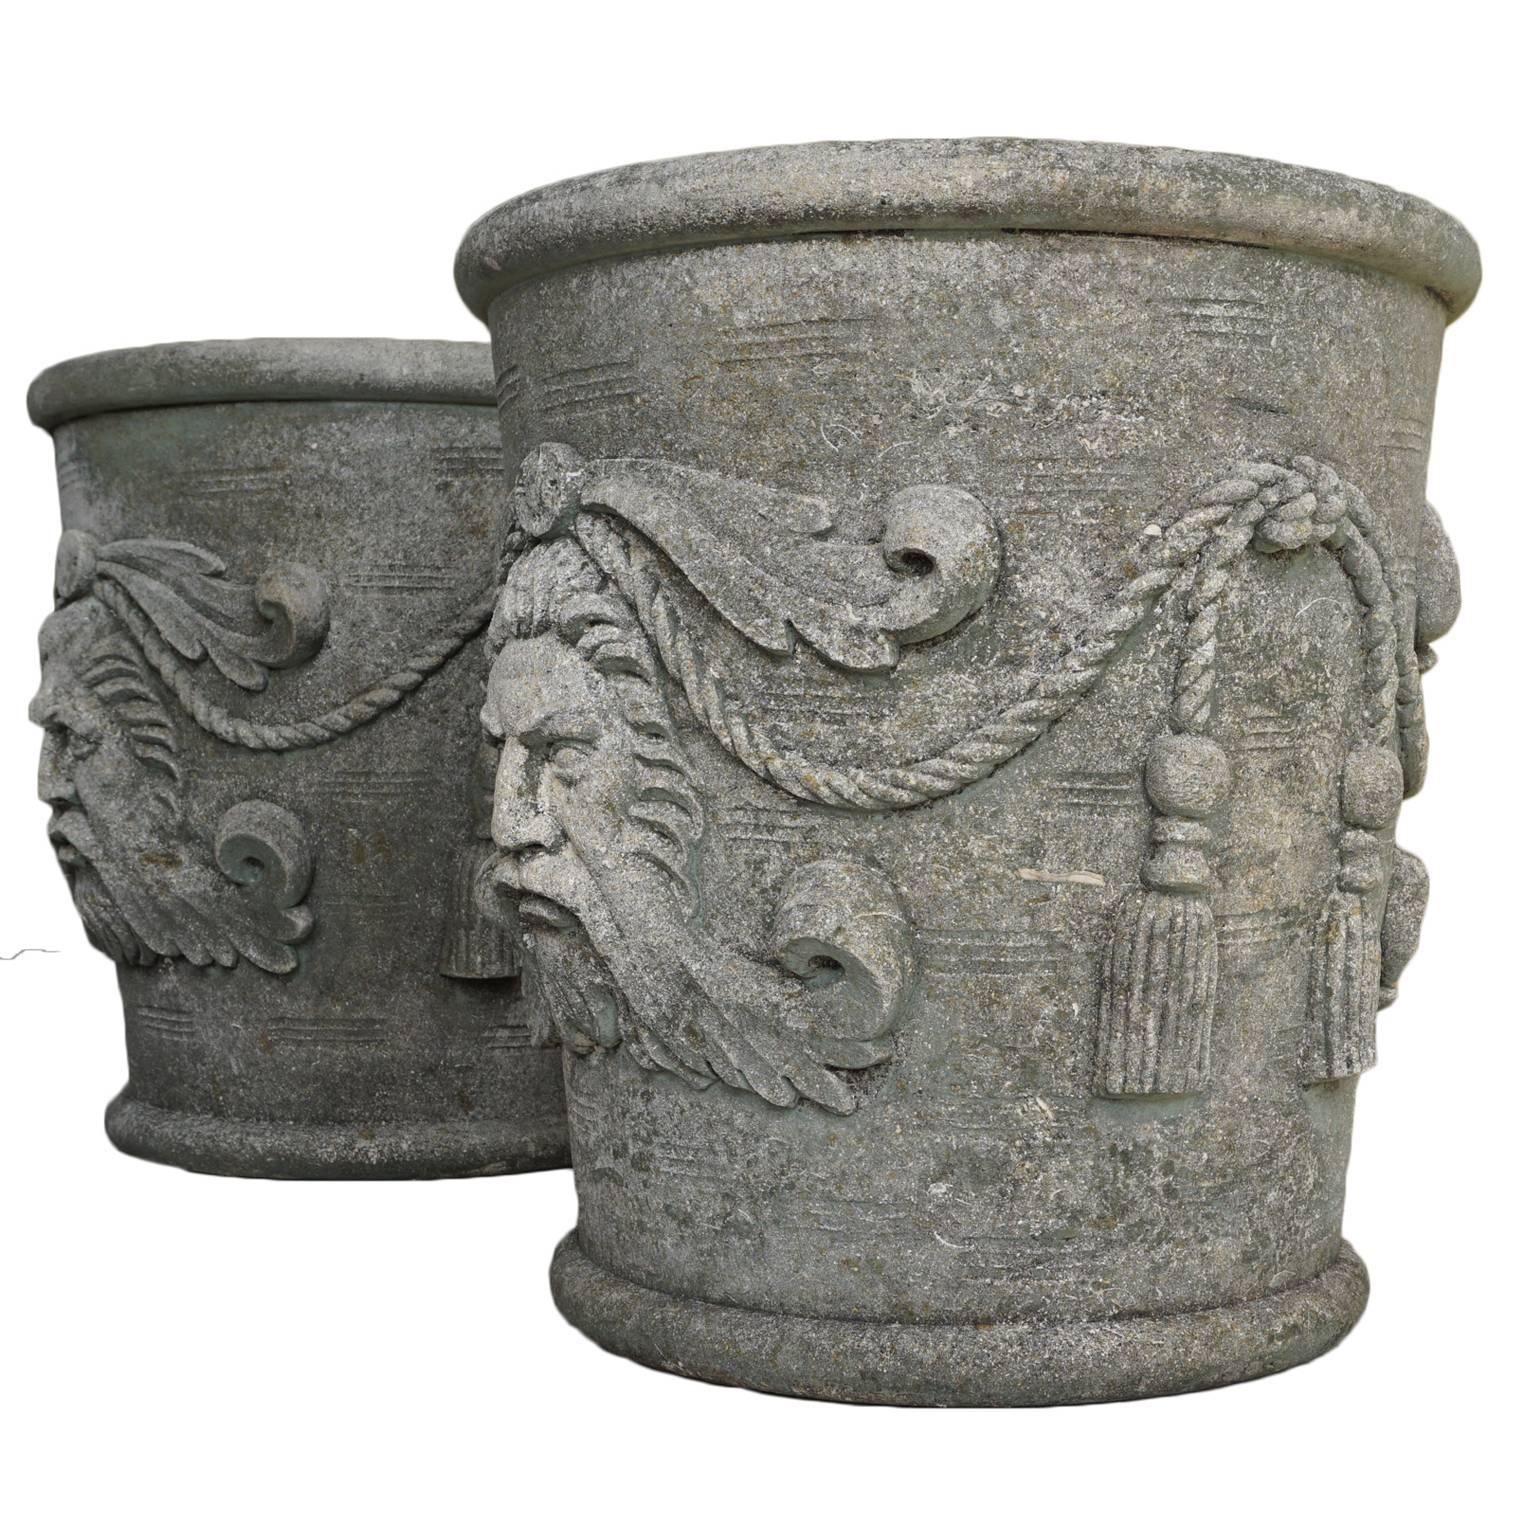 A pair of grand vases with masks from Northern Italy, circa 1930. round garden planters richly decorated with masks and ropes in the Renaissance style, hand-carved in limestone.